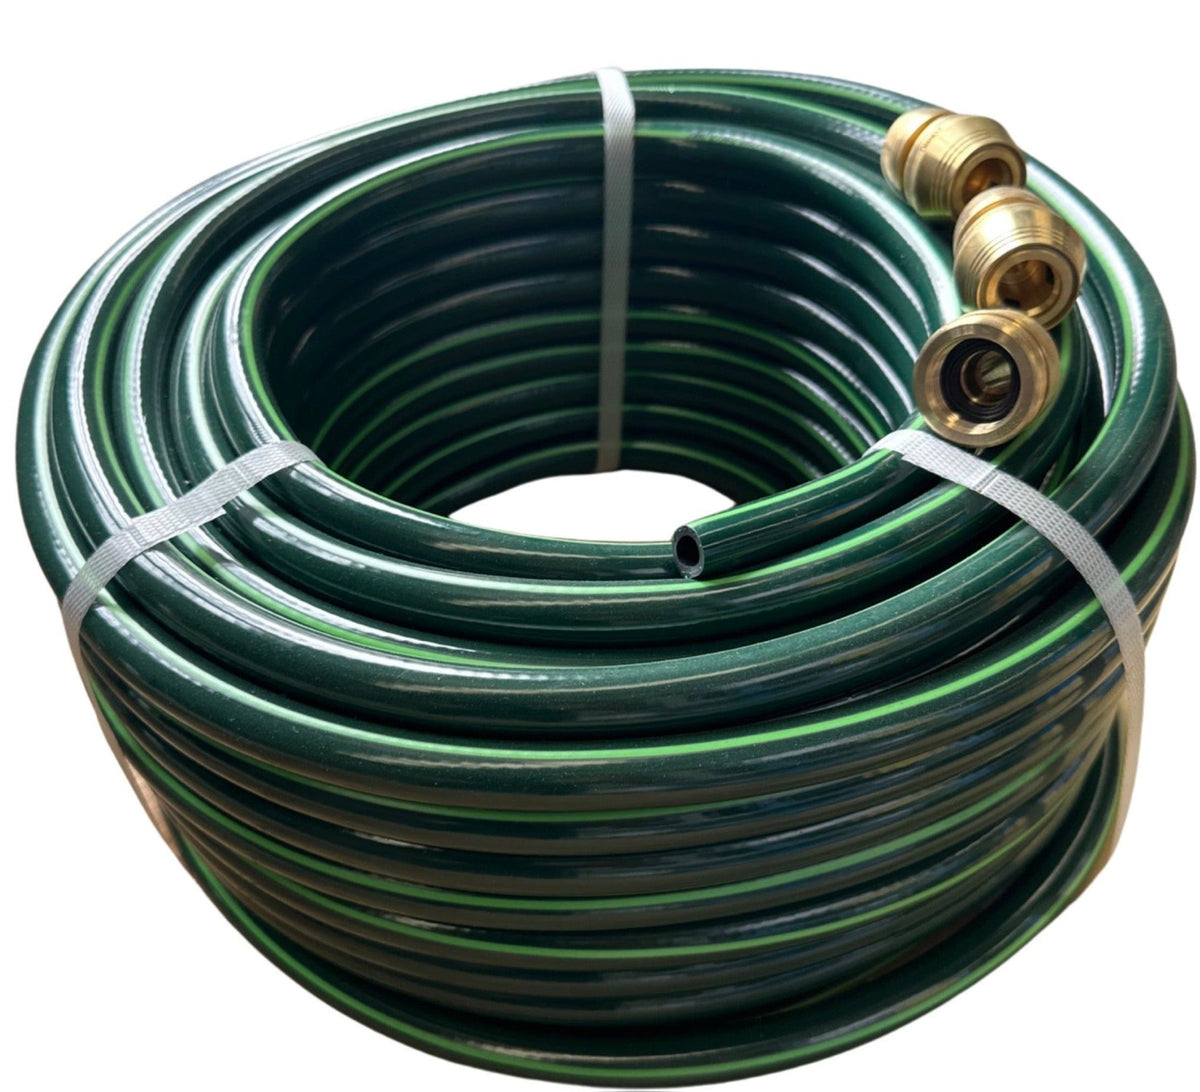 ZORRO Ultimate Garden Hose, Cart and Brass Fittings 13mm